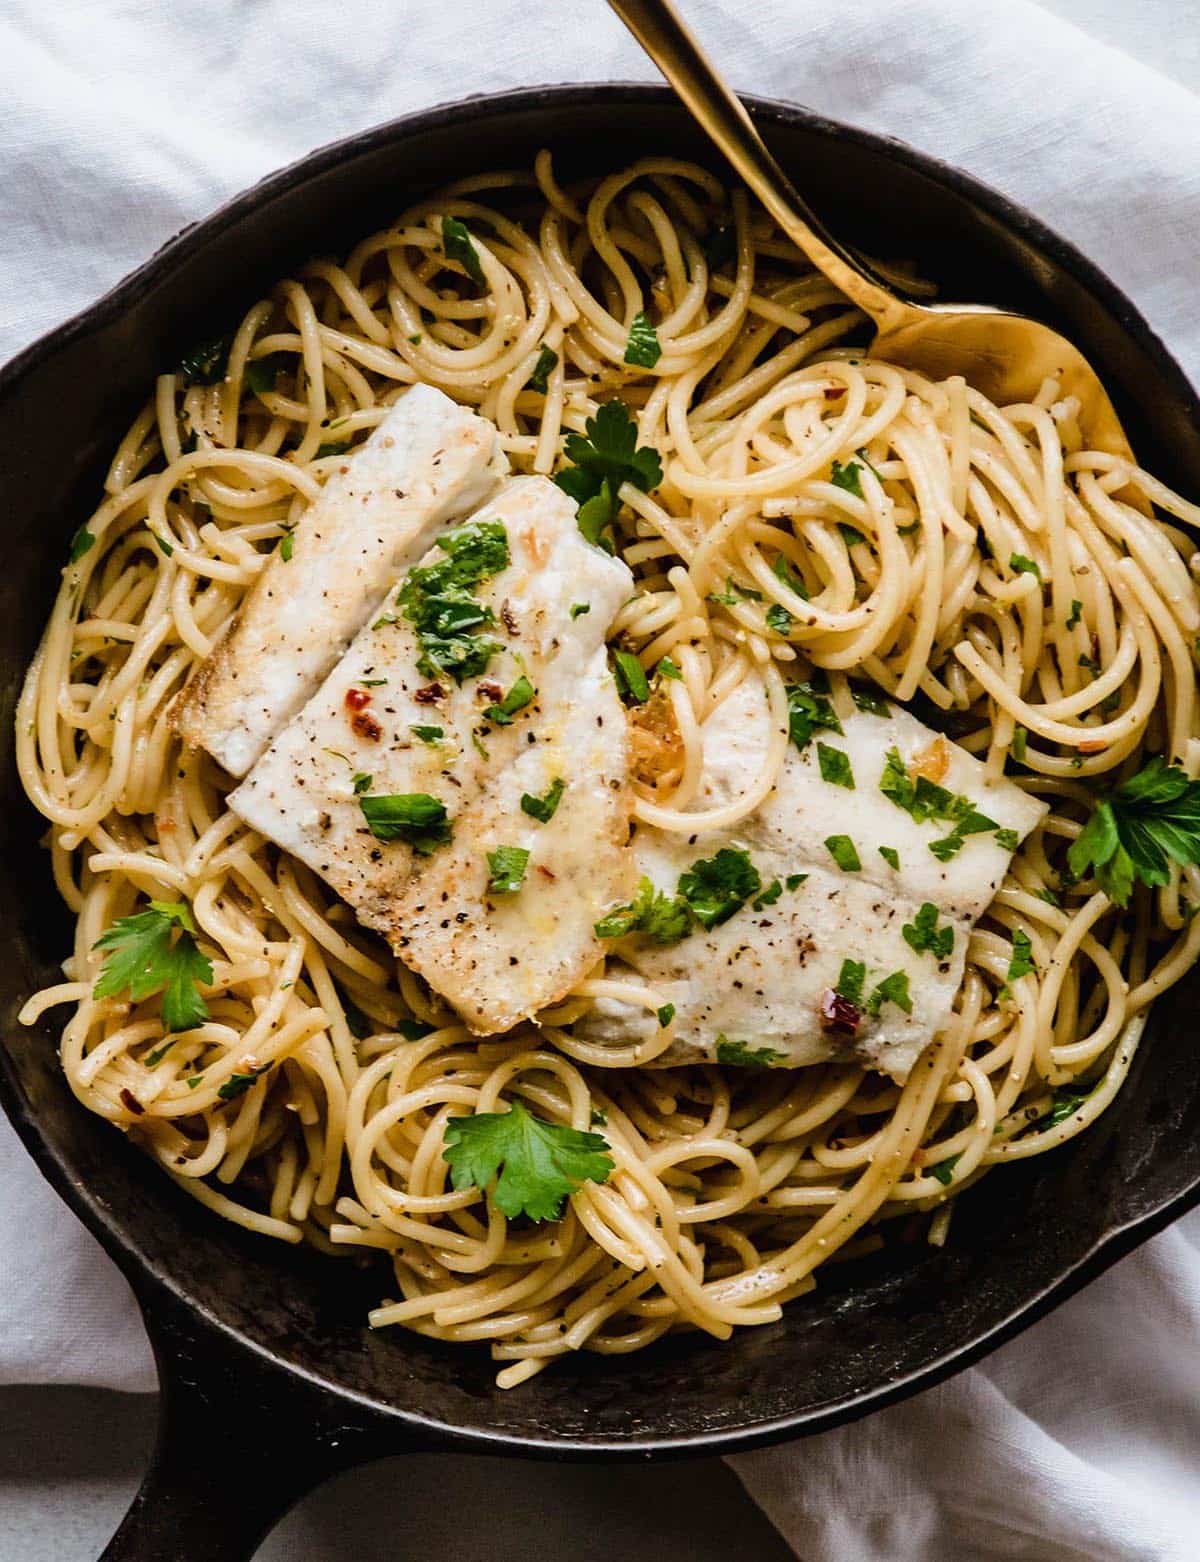 Large spoon twirling spaghetti in a cast iron skillet with cooked fish.